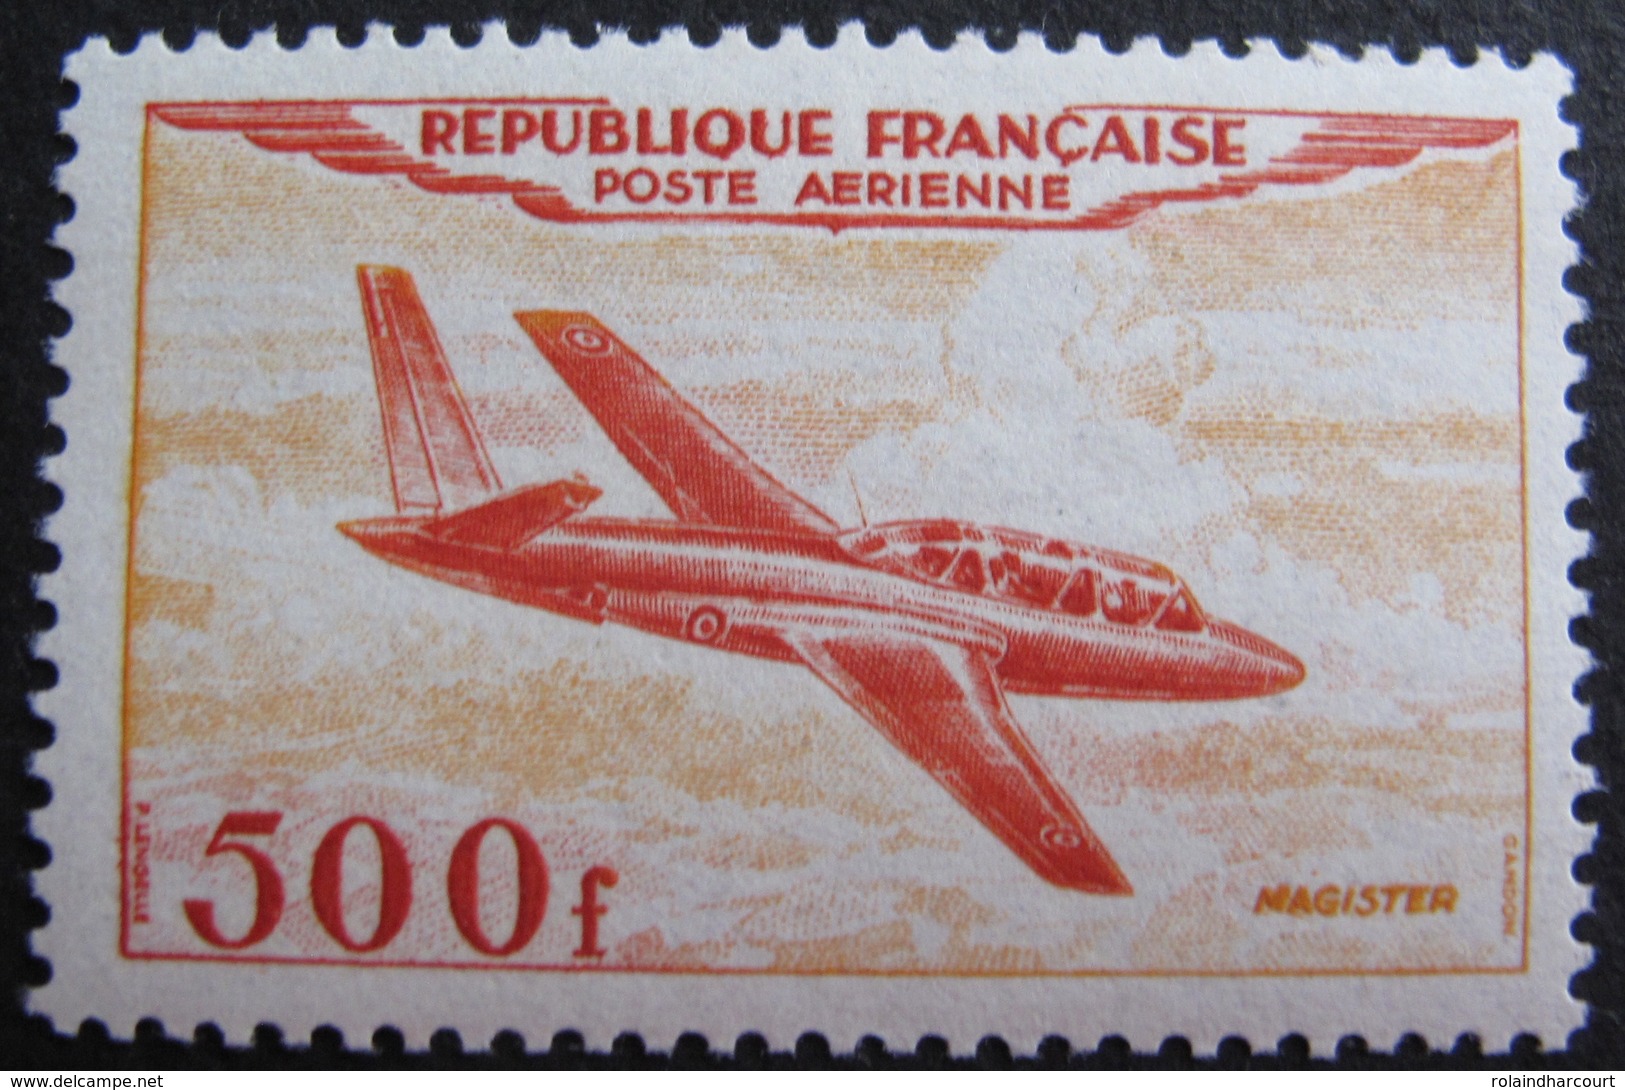 Lot FD/491 - 1954 - POSTE AERIENNE - MAGISTER - N°32 - NEUF* - Cote : 110,00 € - 1927-1959 Mint/hinged